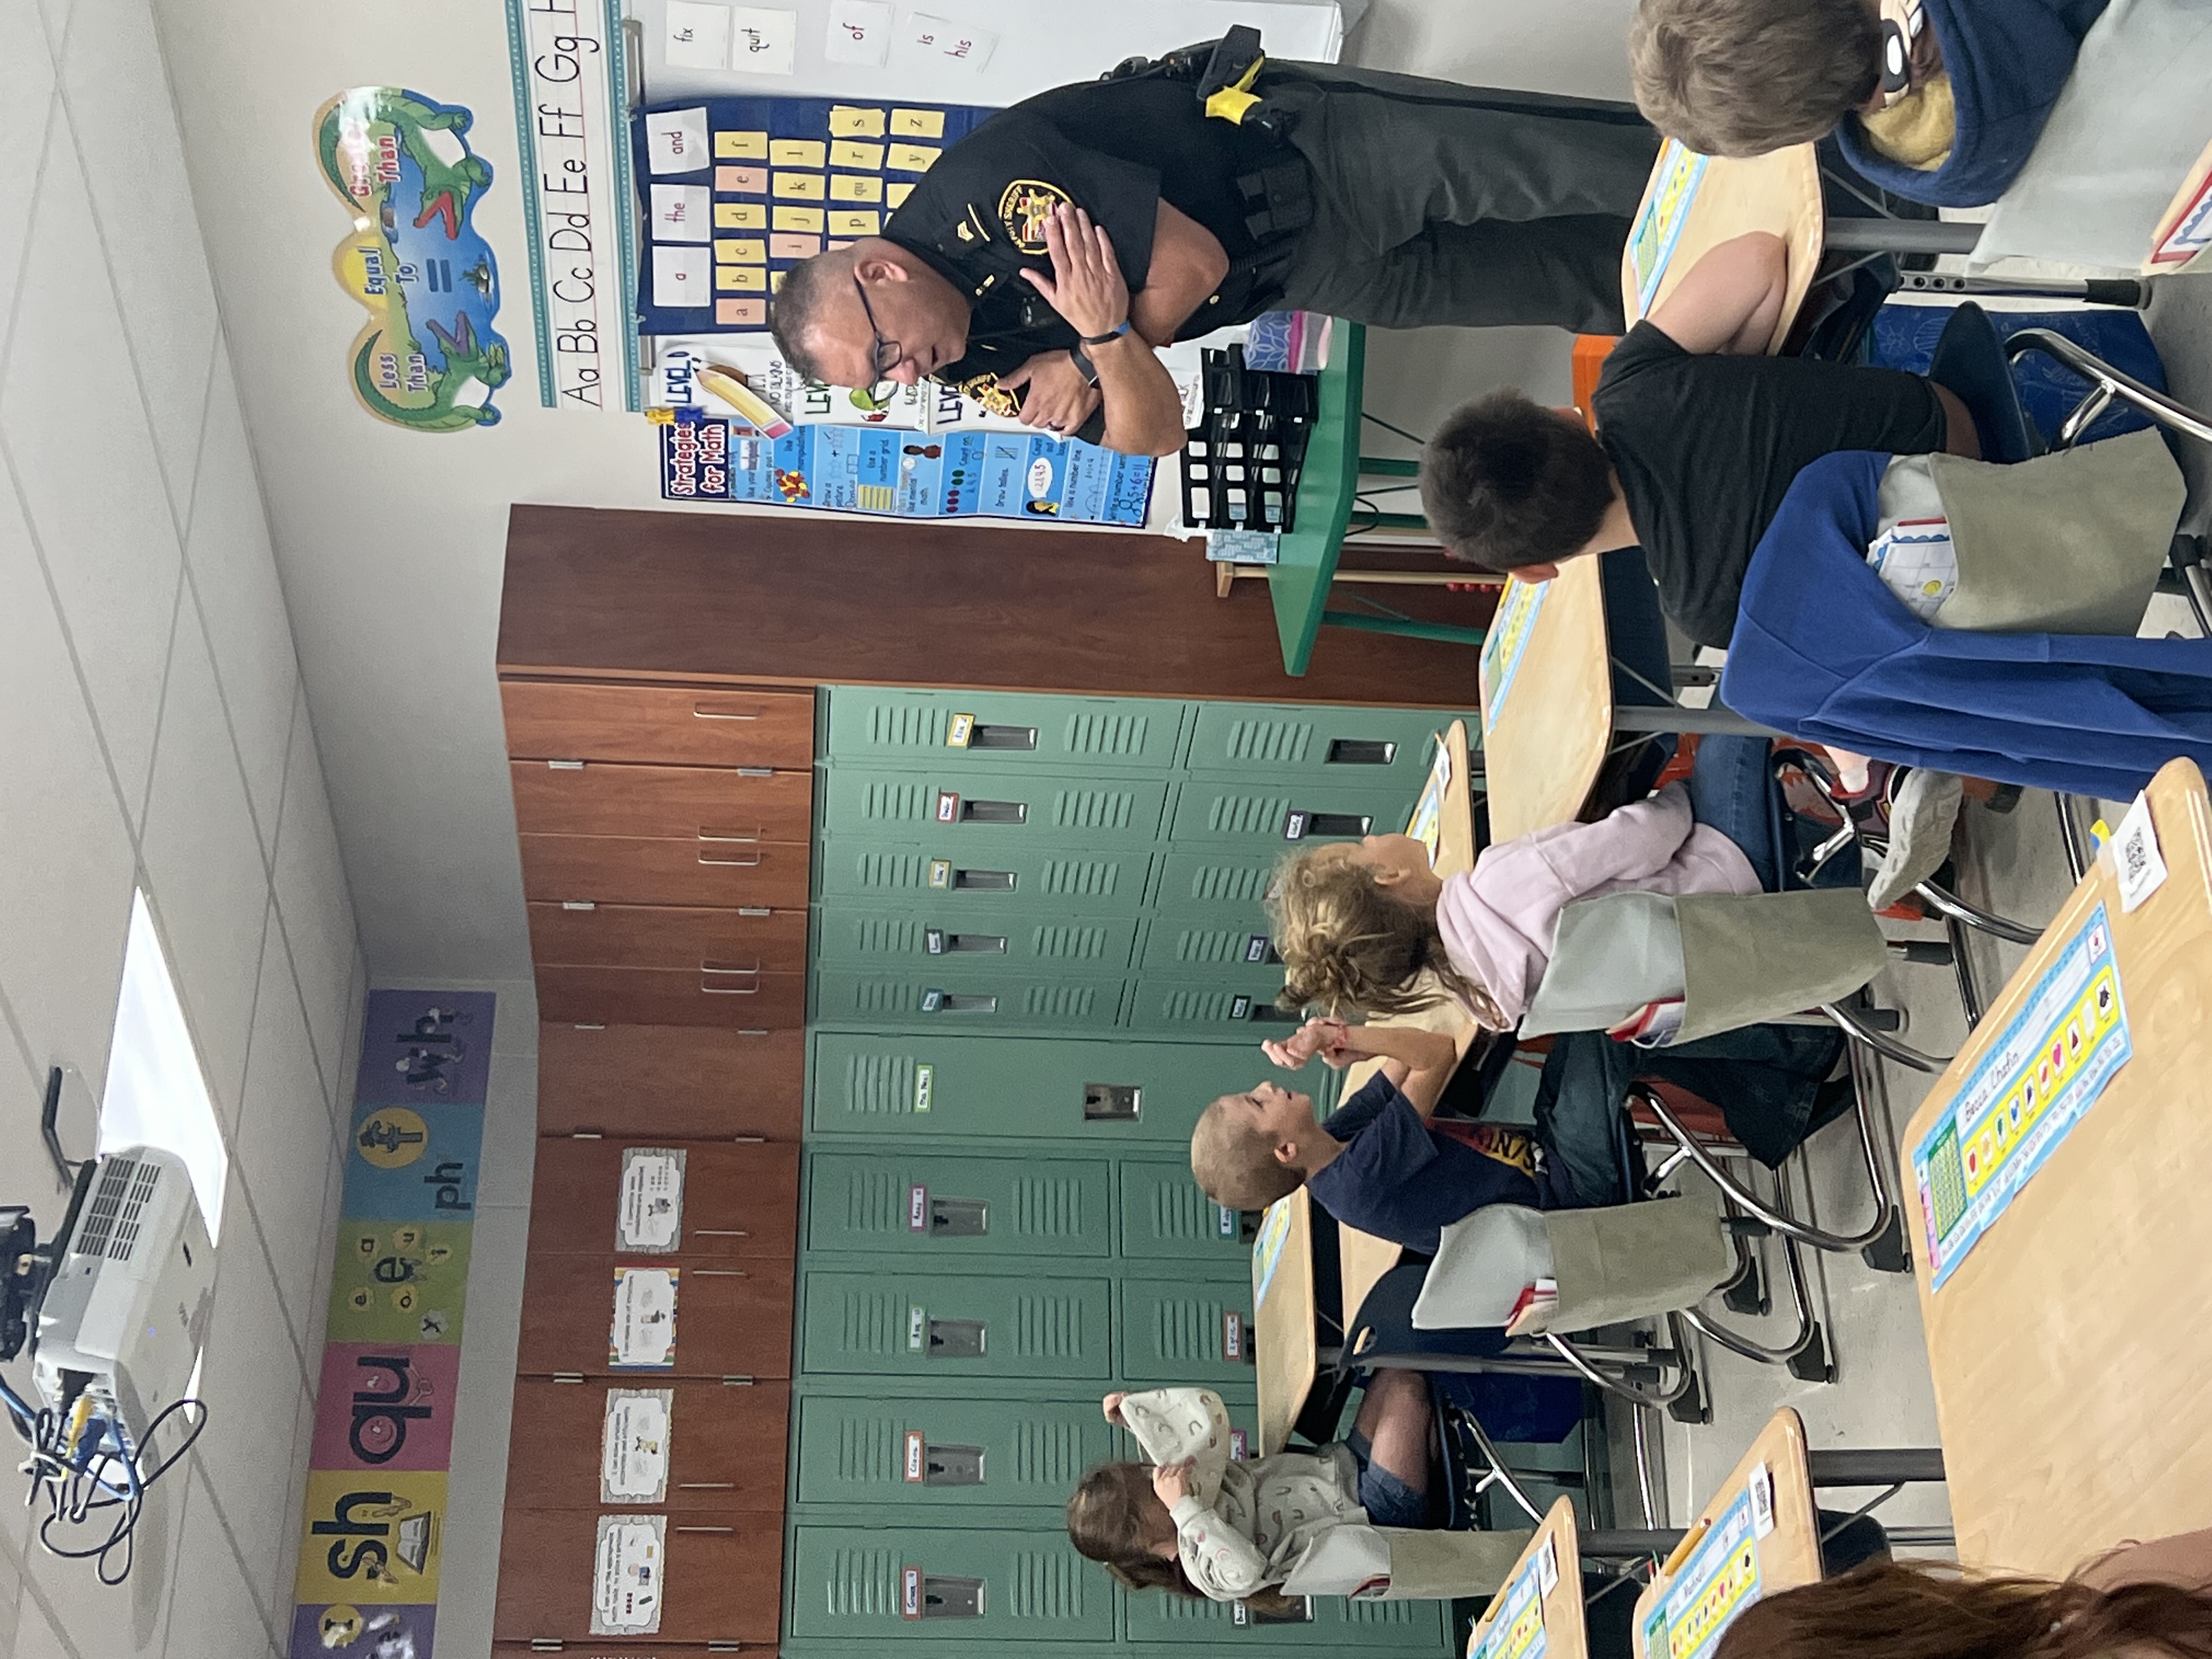 Sgt. Burke speaking to Mrs. Neal's students